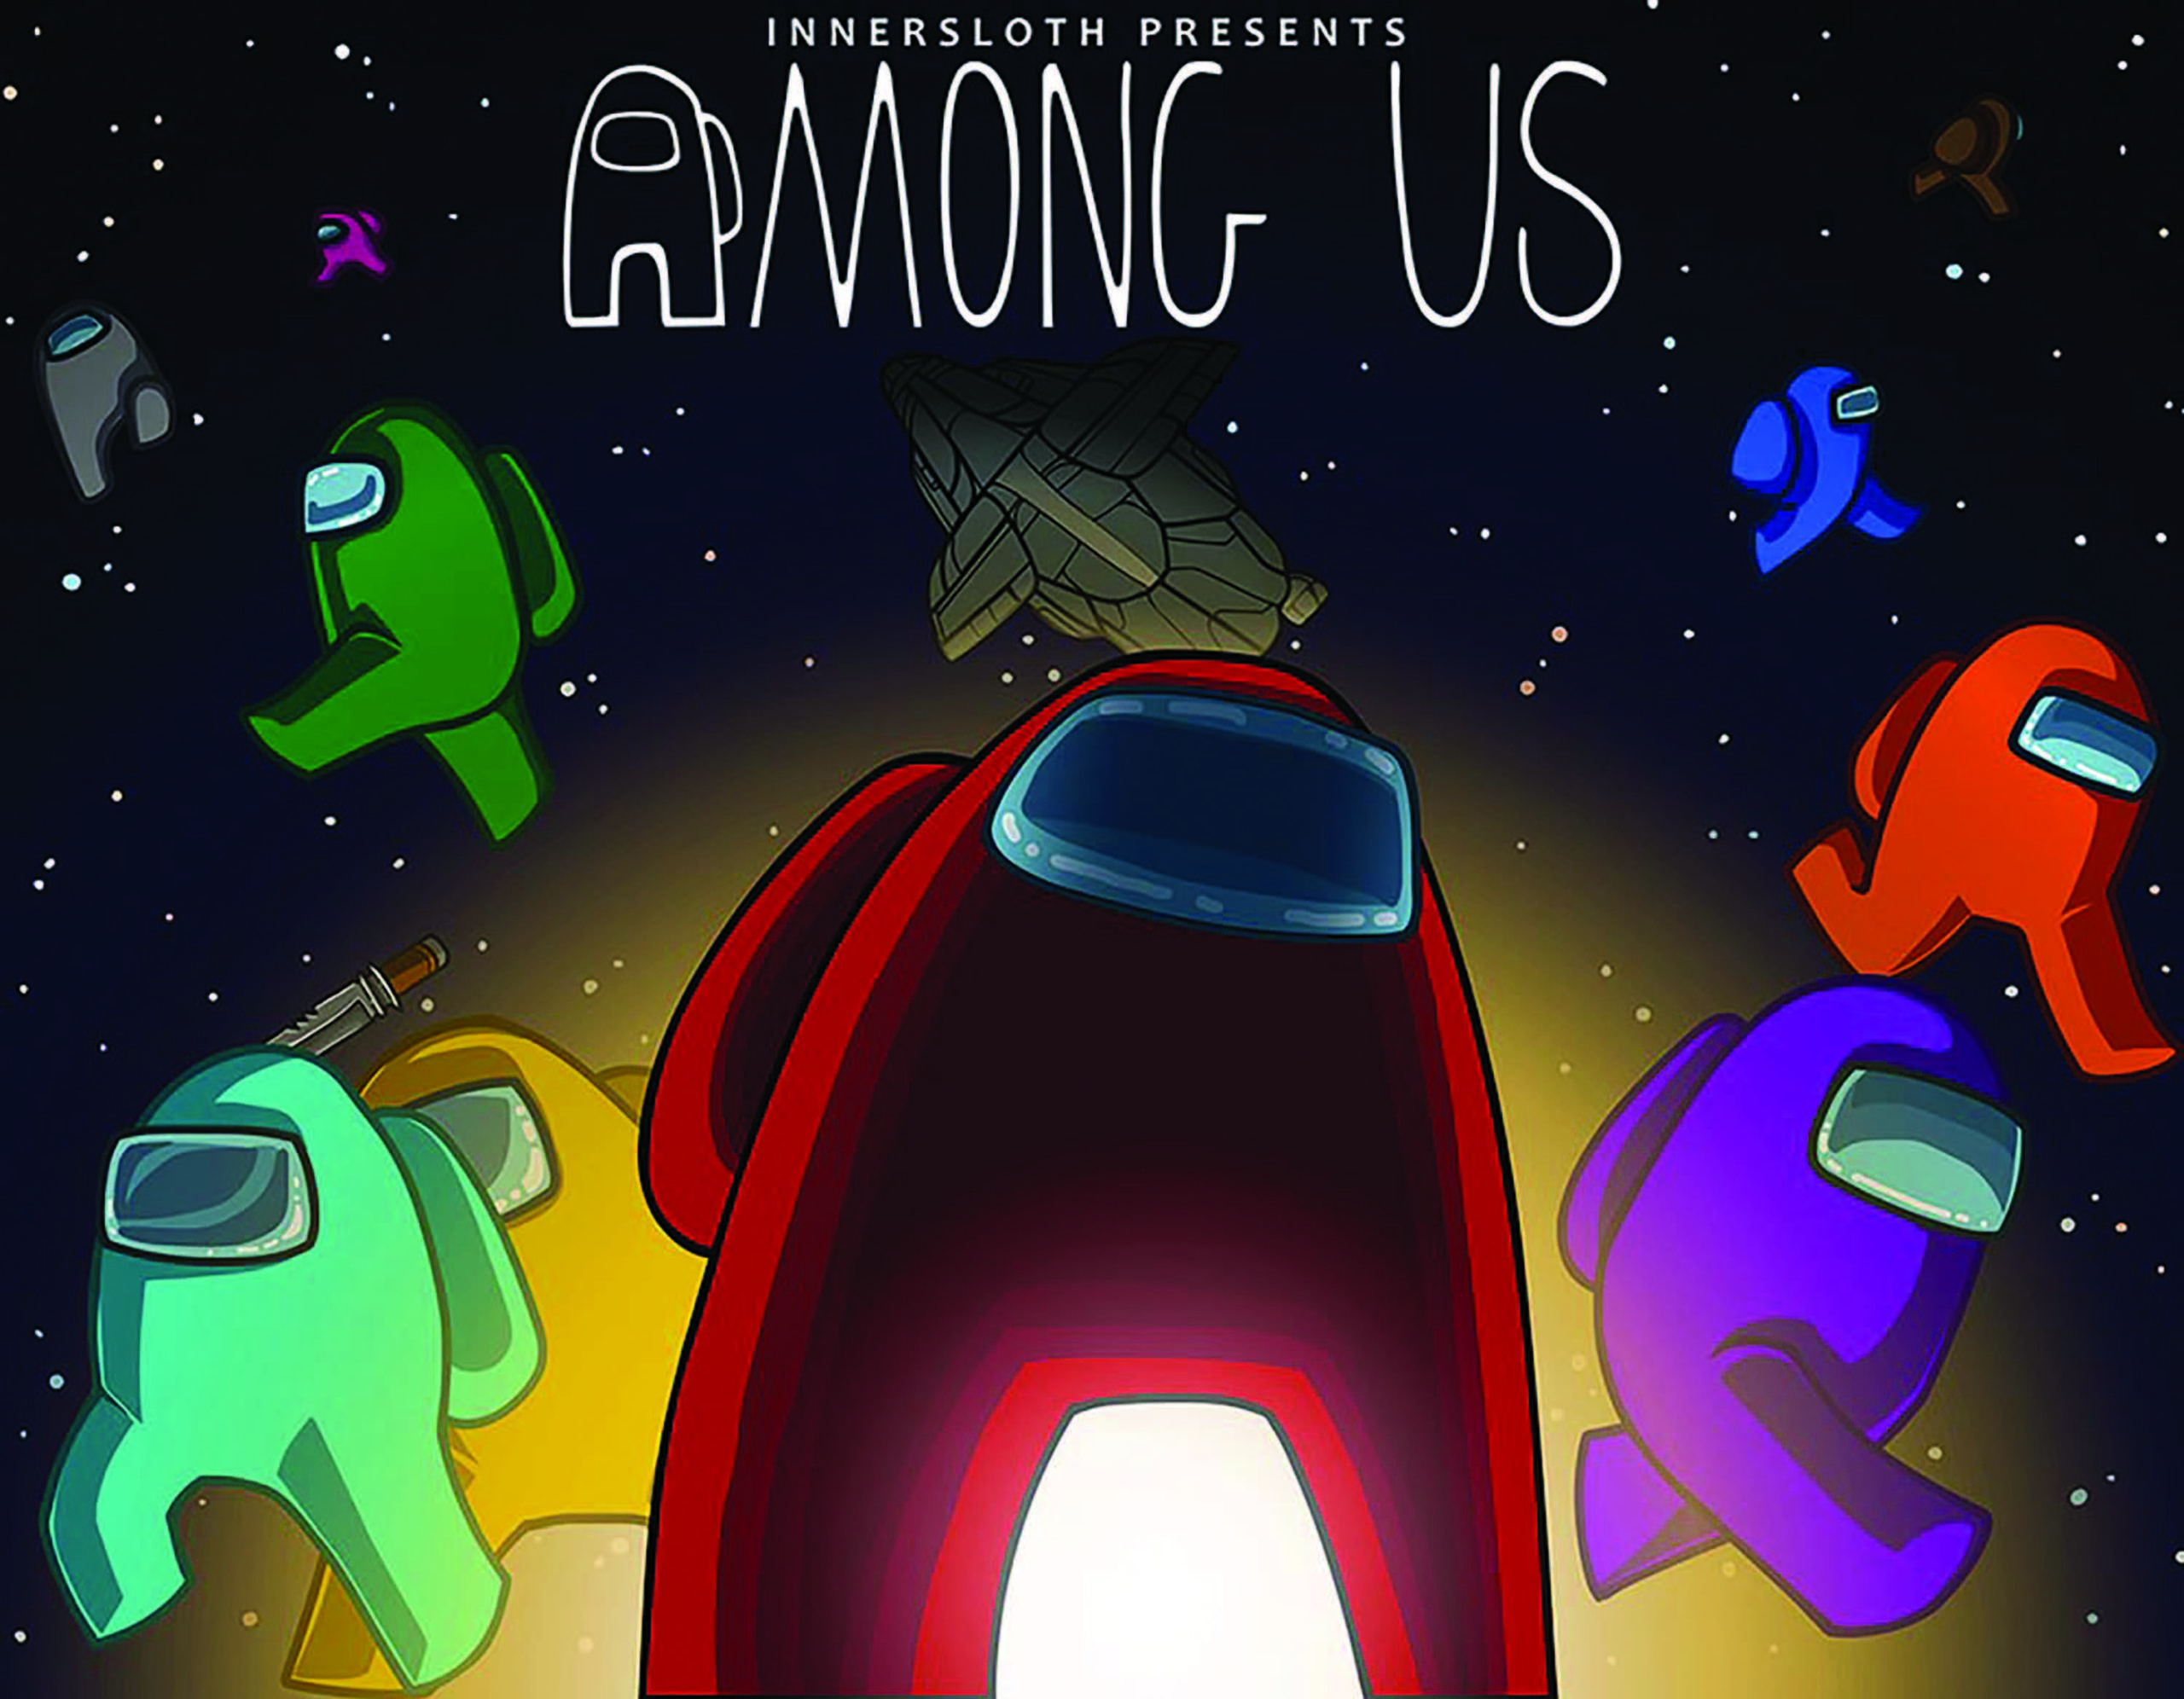 A Review is “Among Us”